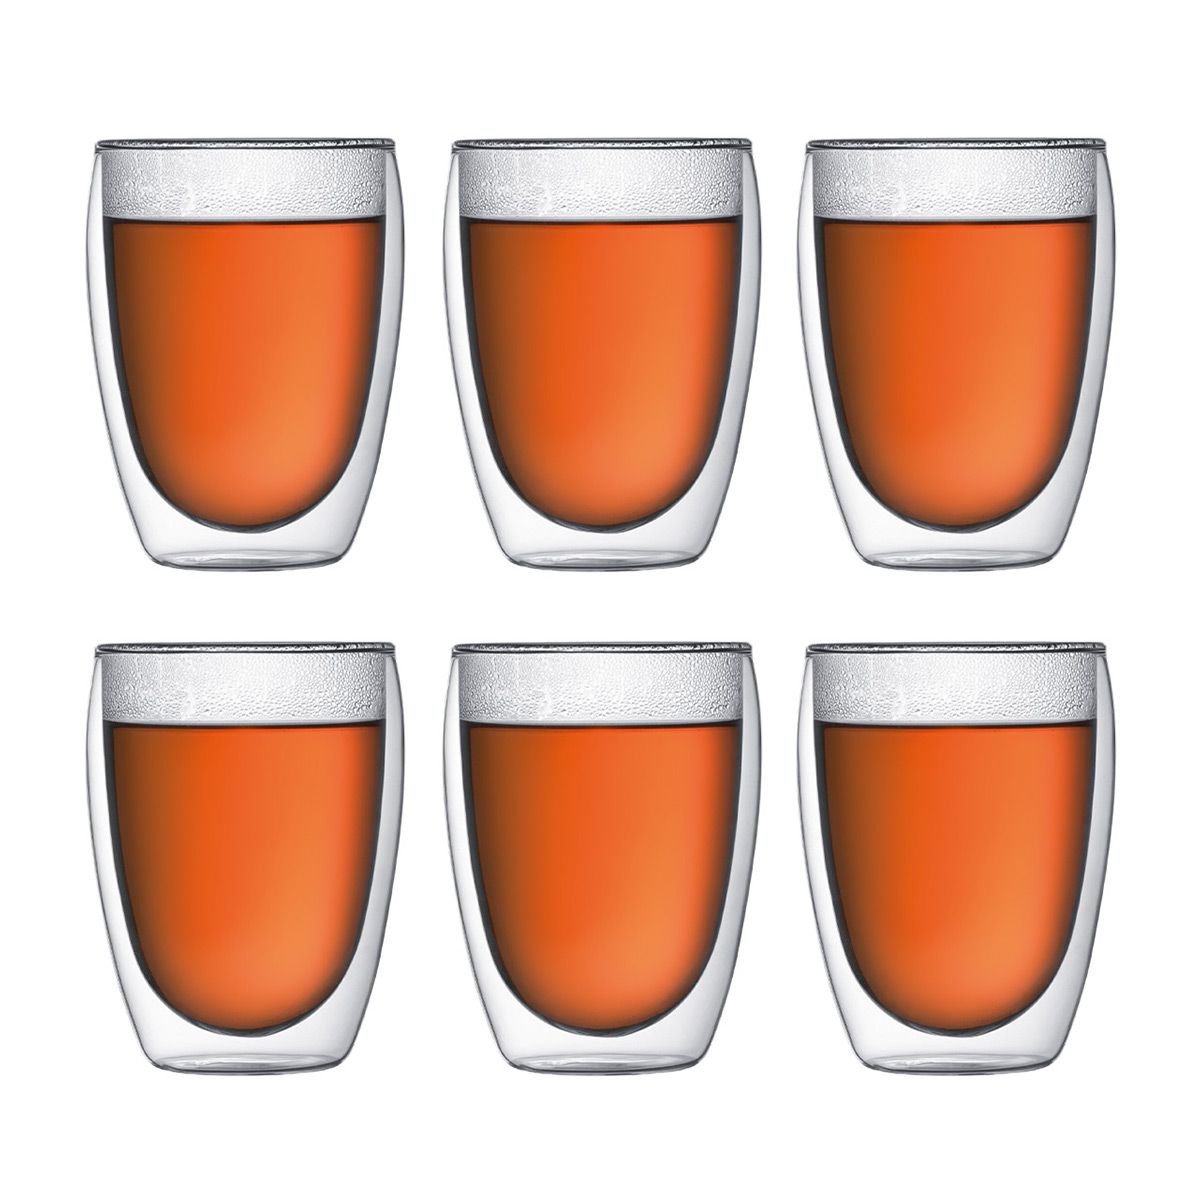 4 x 12 Ounce and 4 x 8 Ounce Bodum Pavina Double Wall Thermo Glasses Set of 8 